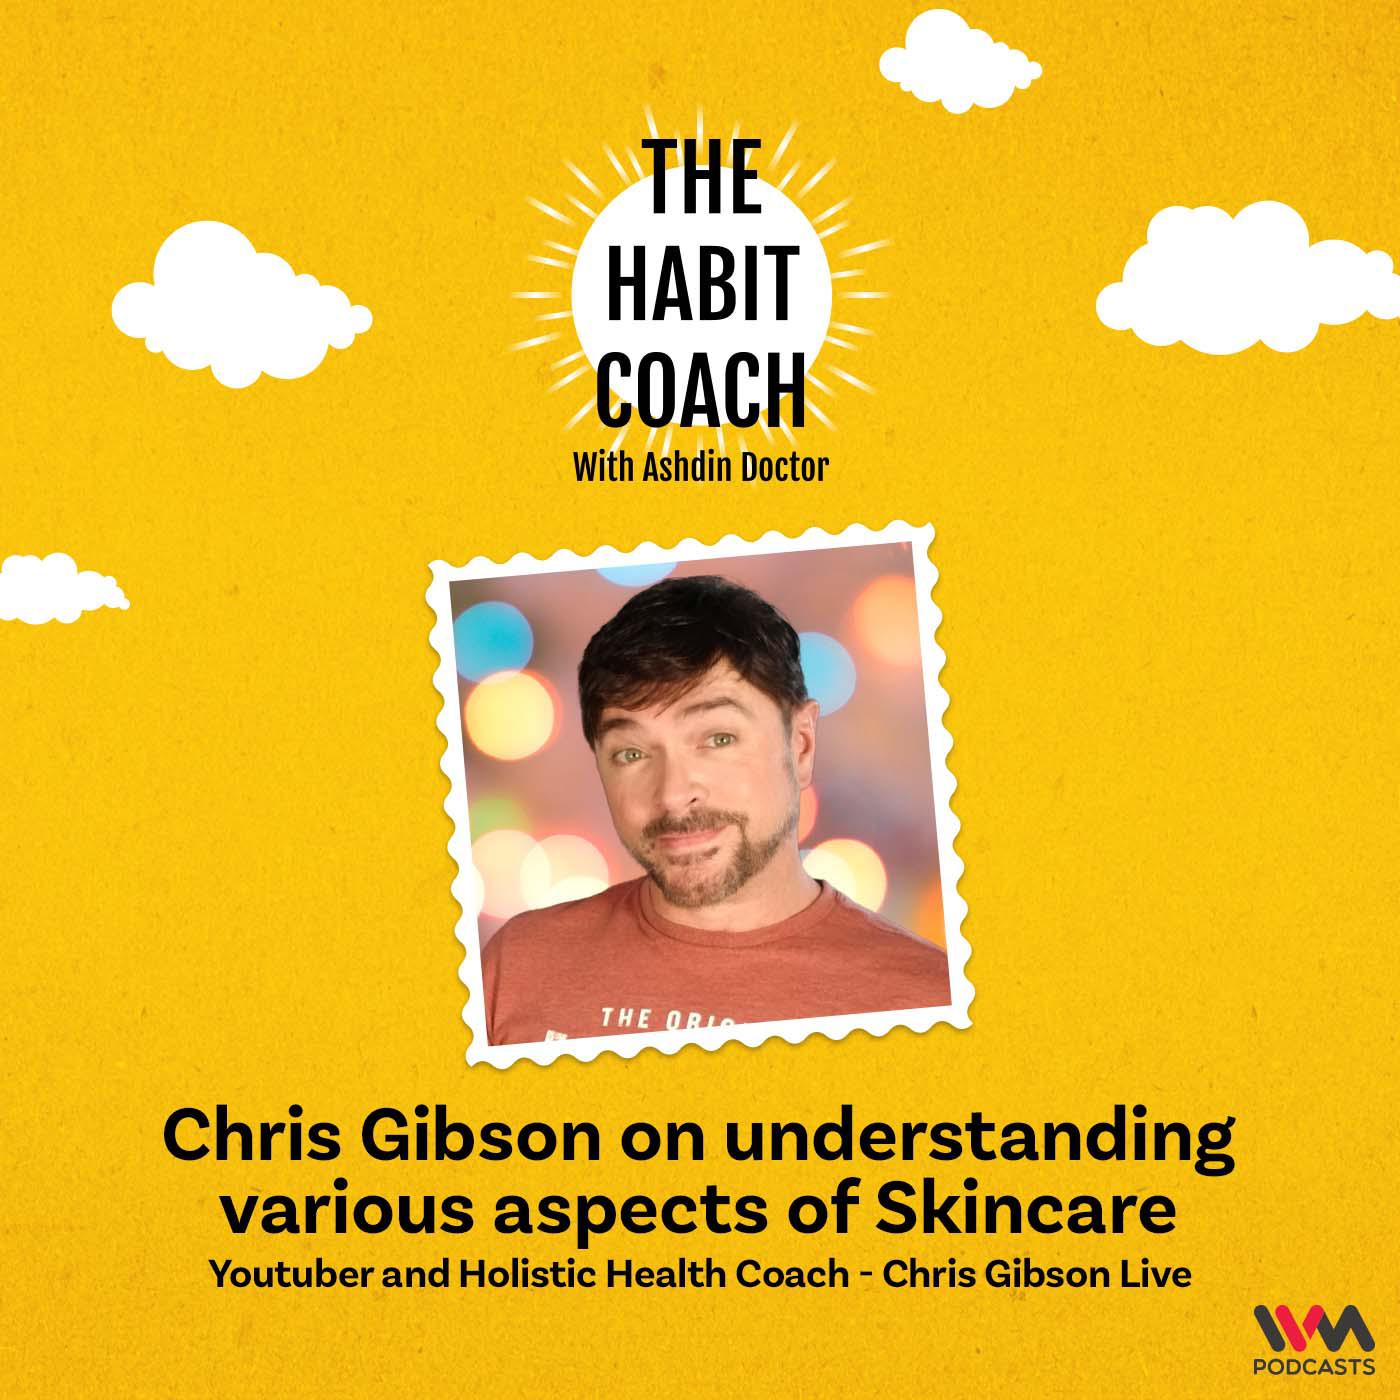 Chris Gibson on understanding various aspects of Skincare